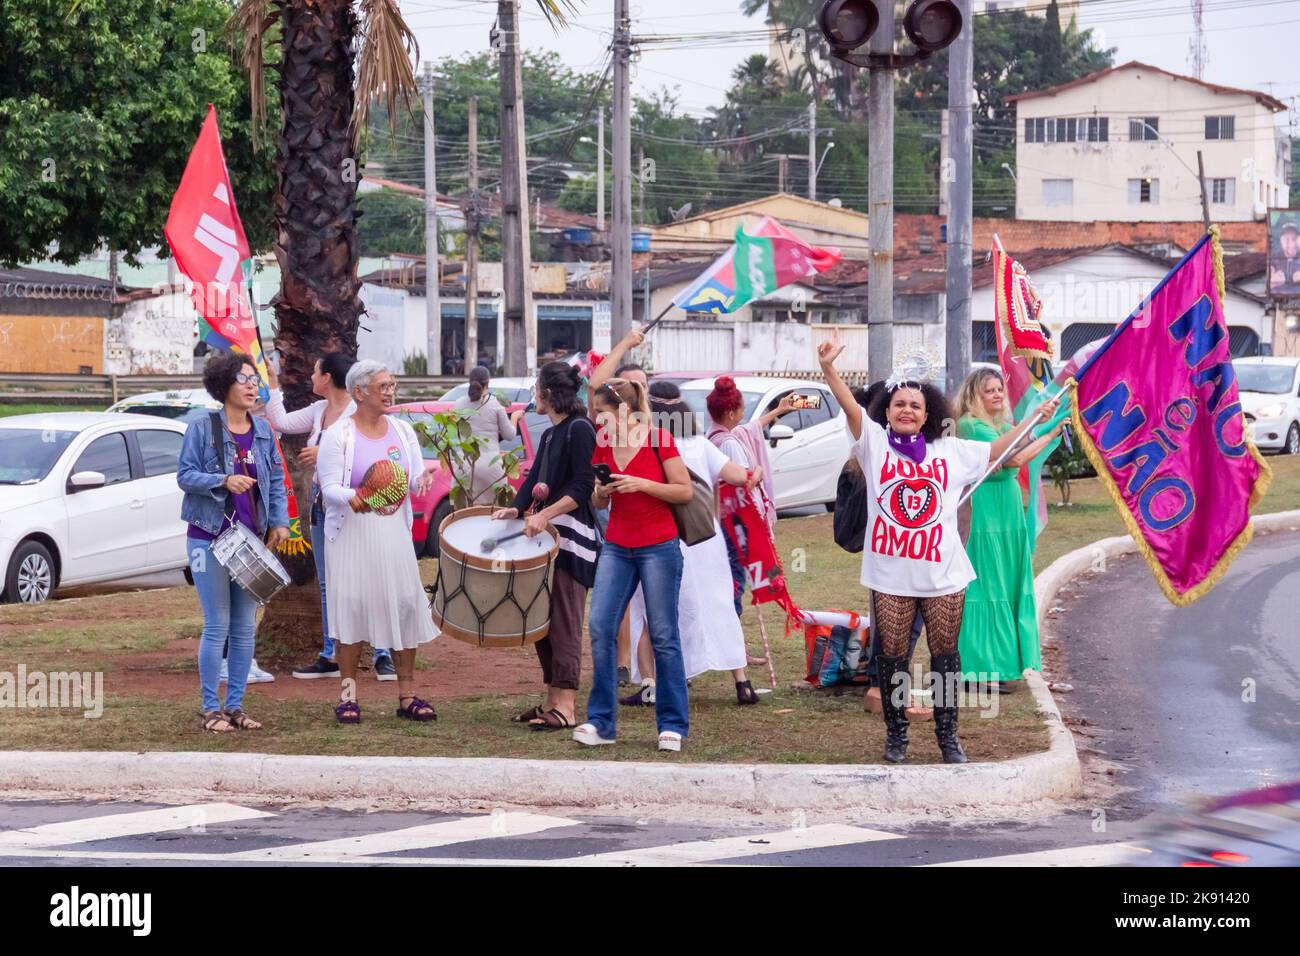 Goiânia, Goias, Brazil – October 21, 2022: Several people gathered, holding flags in an act in favor of Lula - candidate for the presidency of Brazil. Stock Photo